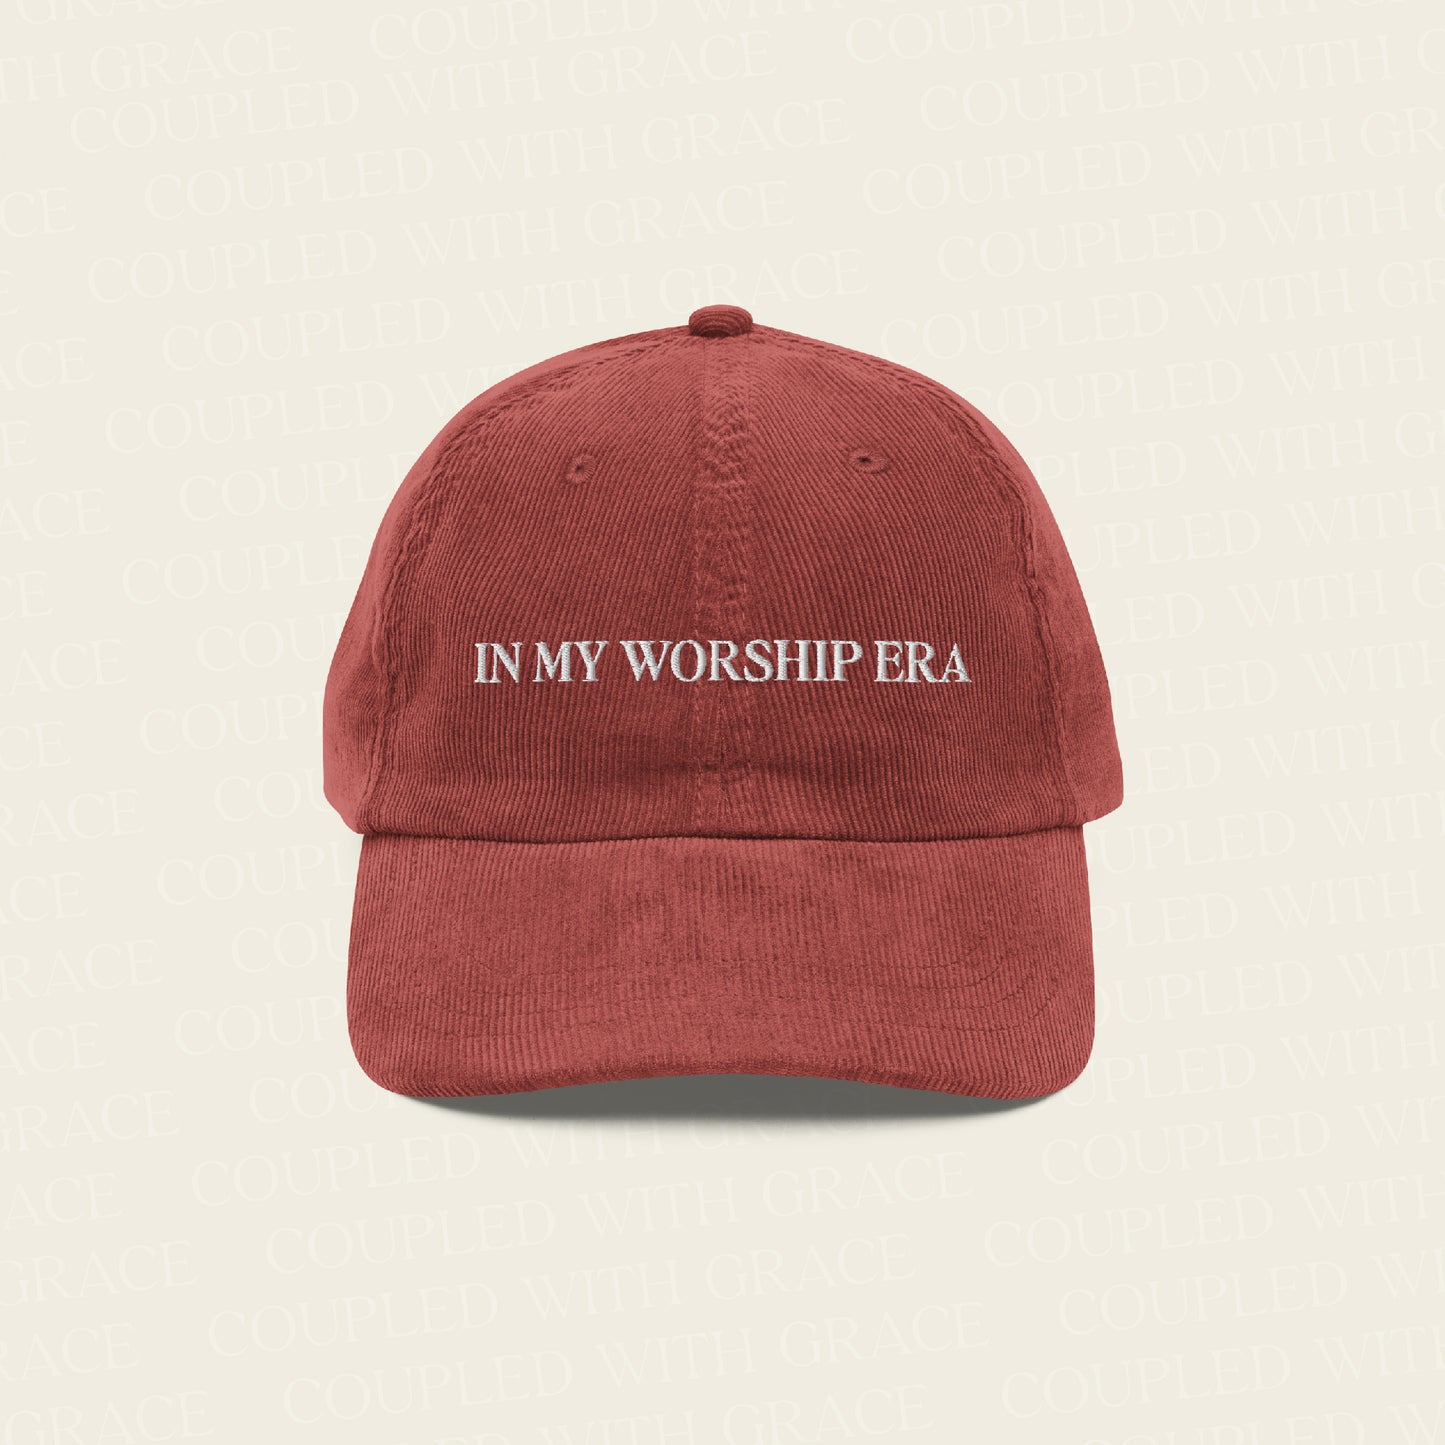 Christian Apparel | Christian Hat | In My Worship Era Embroidered Hat | Vintage Hat | Christian Gifts for Women